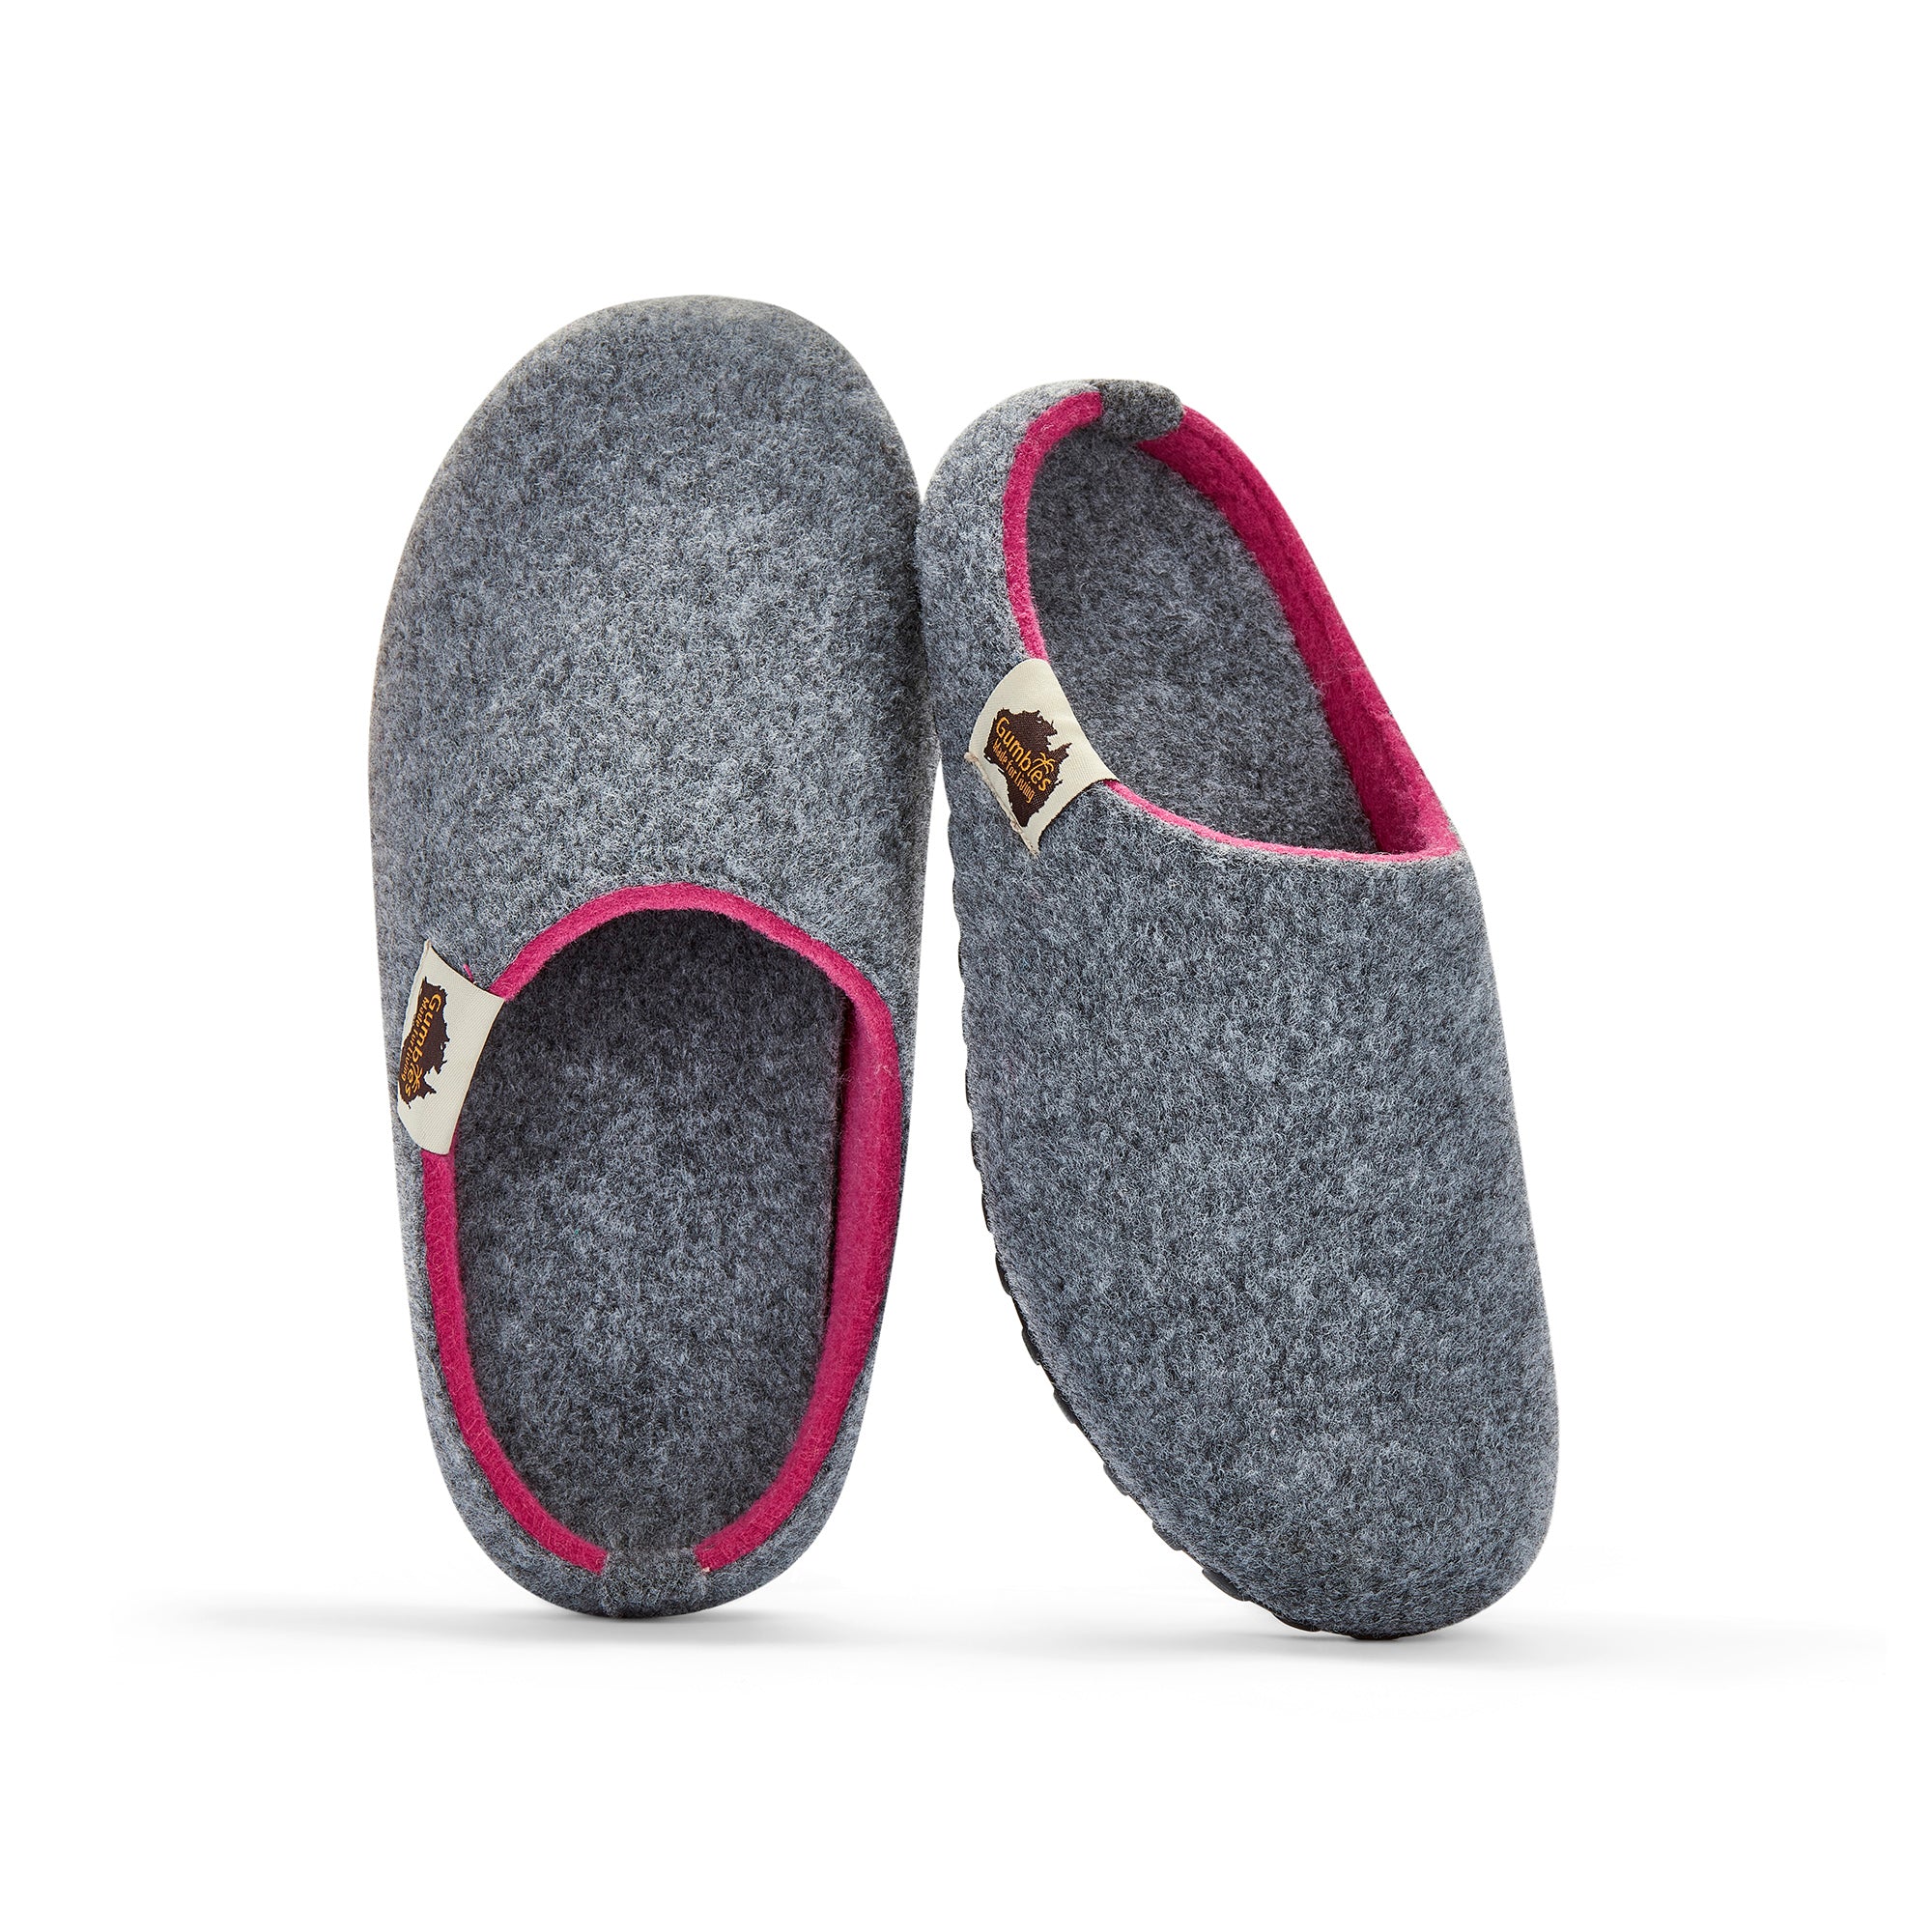 Outback - Women's - Grey & Pink